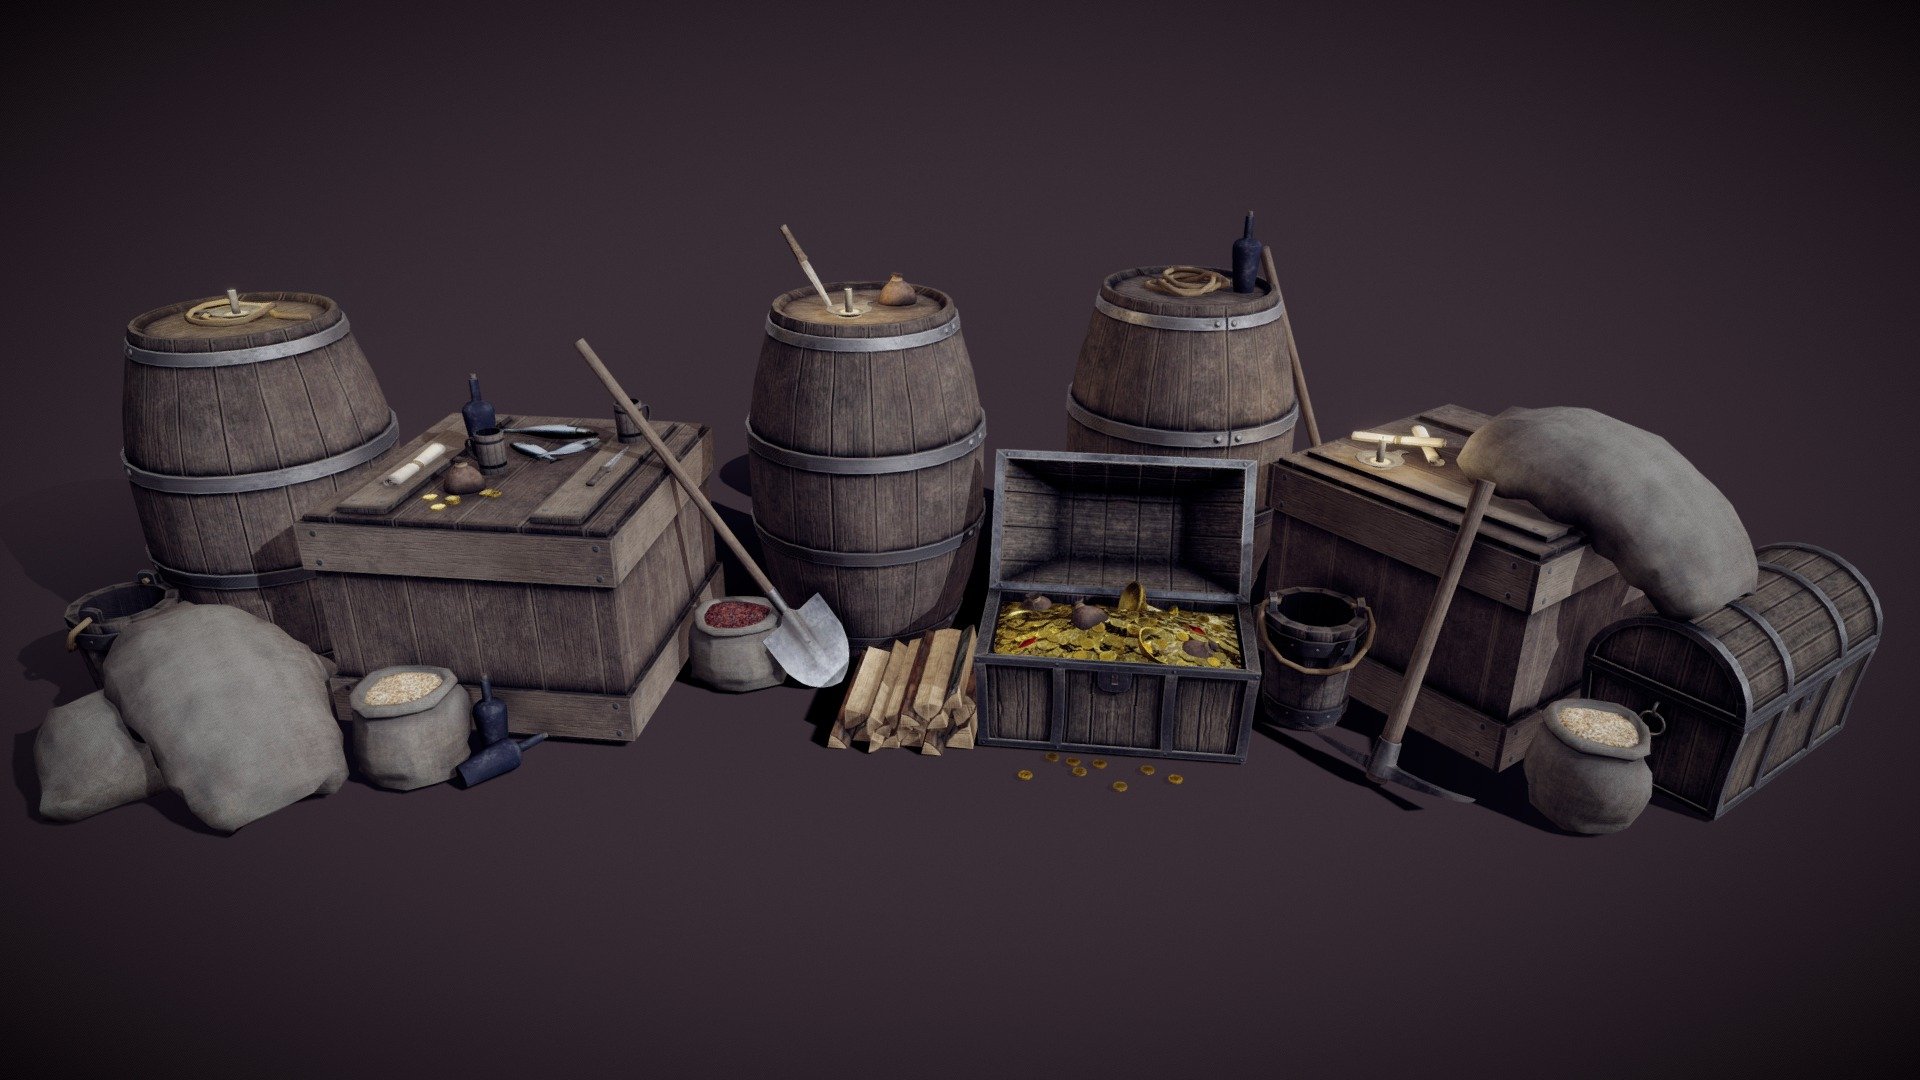 I present to you a medieval pack of models, can be used for different locations, suitable for first-person game, texture 4096x4096.
1 material.
Box
Barrel
Chest
Rope
Pickaxe
Shovel
Fish
Coins
Bag of coins
Bags
Groat bags
Knife
Bottle
Candlestick
Scroll
Bucket
Cup
Firewood
Golden Bowl
Golden Amulet - Medieval Props Pack - Buy Royalty Free 3D model by Ruslan Malovsky (@malovsky) 3d model